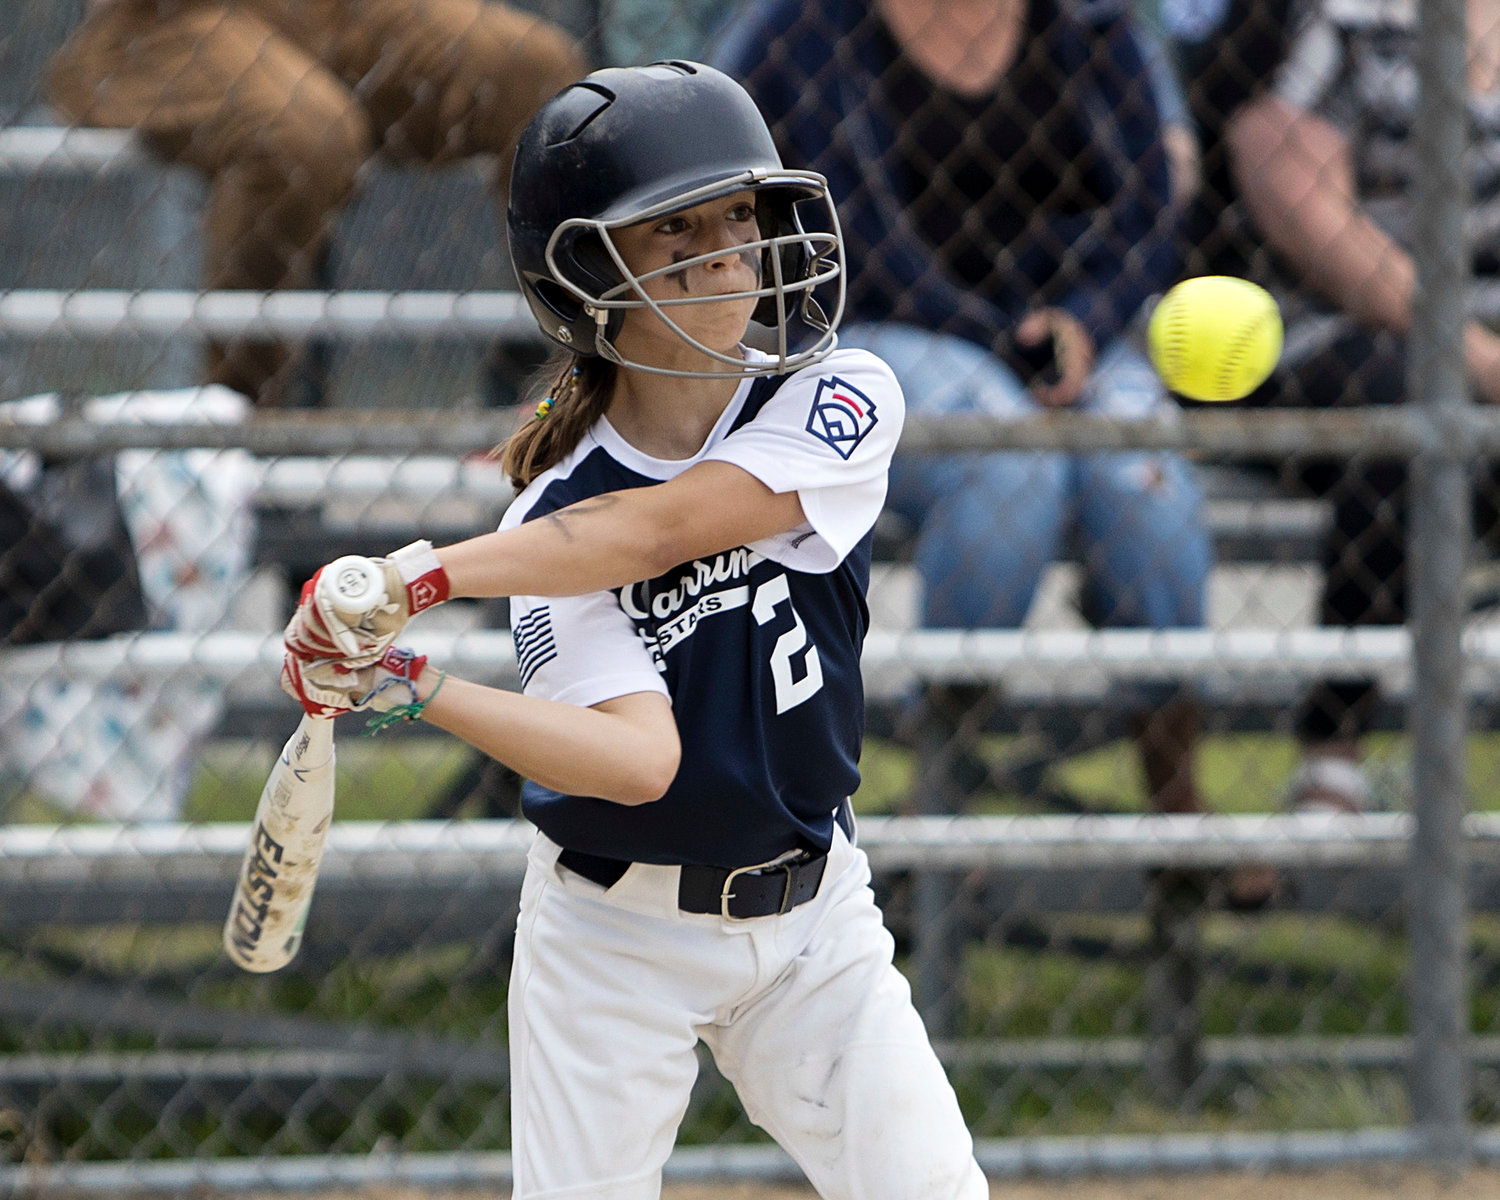 Angie Promades watches the ball as she goes up to bat against Middletown in the first inning of the Minors Division Softball All-Stars, Tuesday.